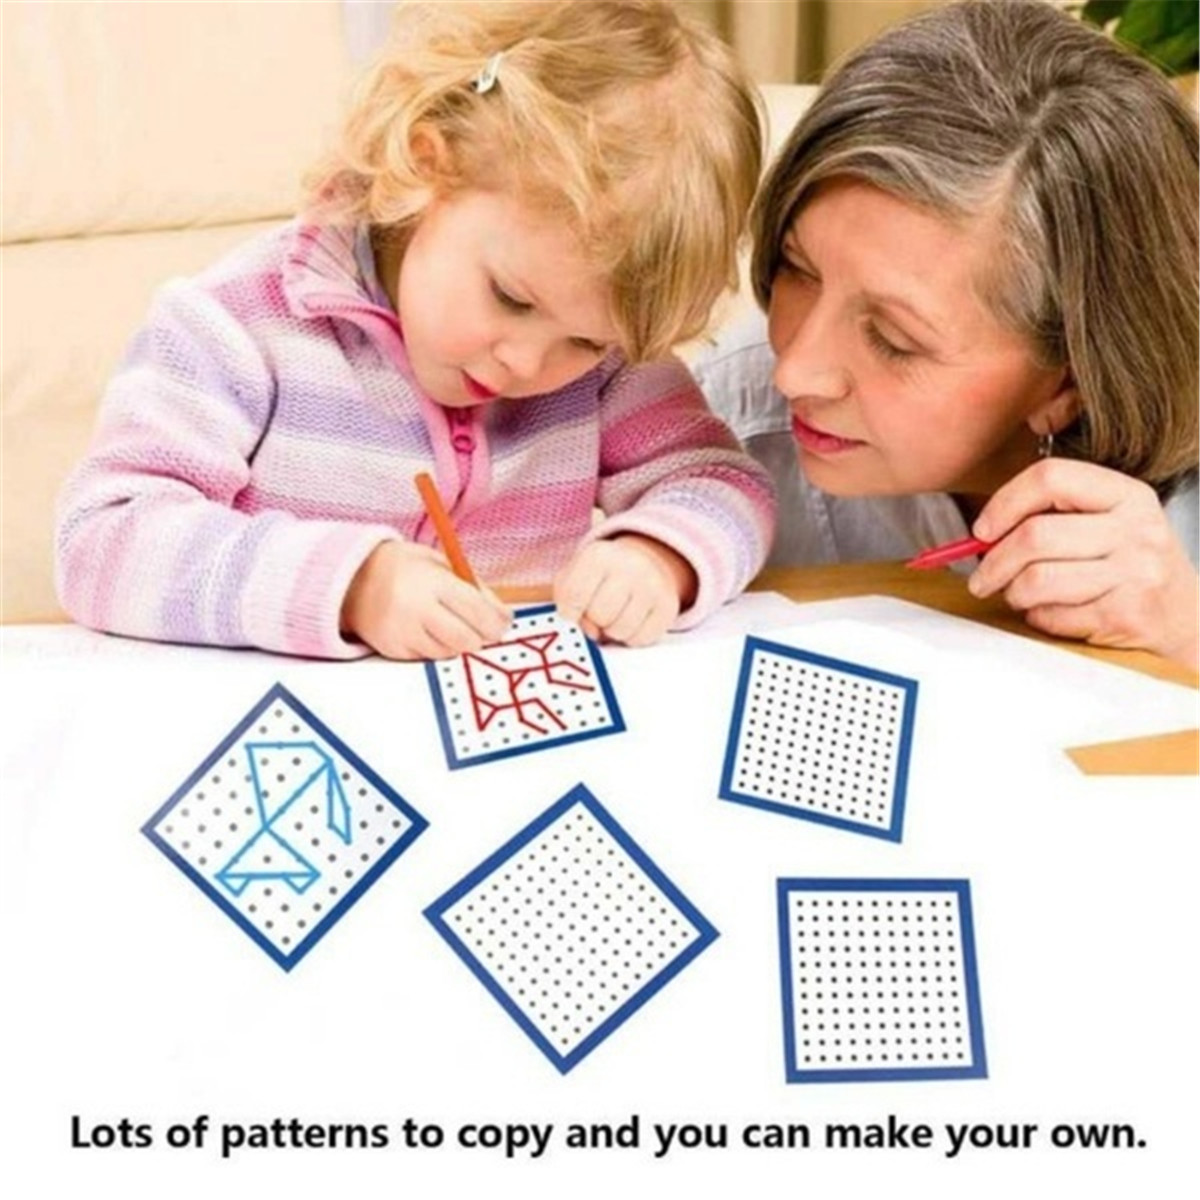 Montessori-Traditional-Teaching-Geometry-Puzzle-Pattern-Educational-School-Home-Game-Toy-for-Kids-Gi-1726969-6